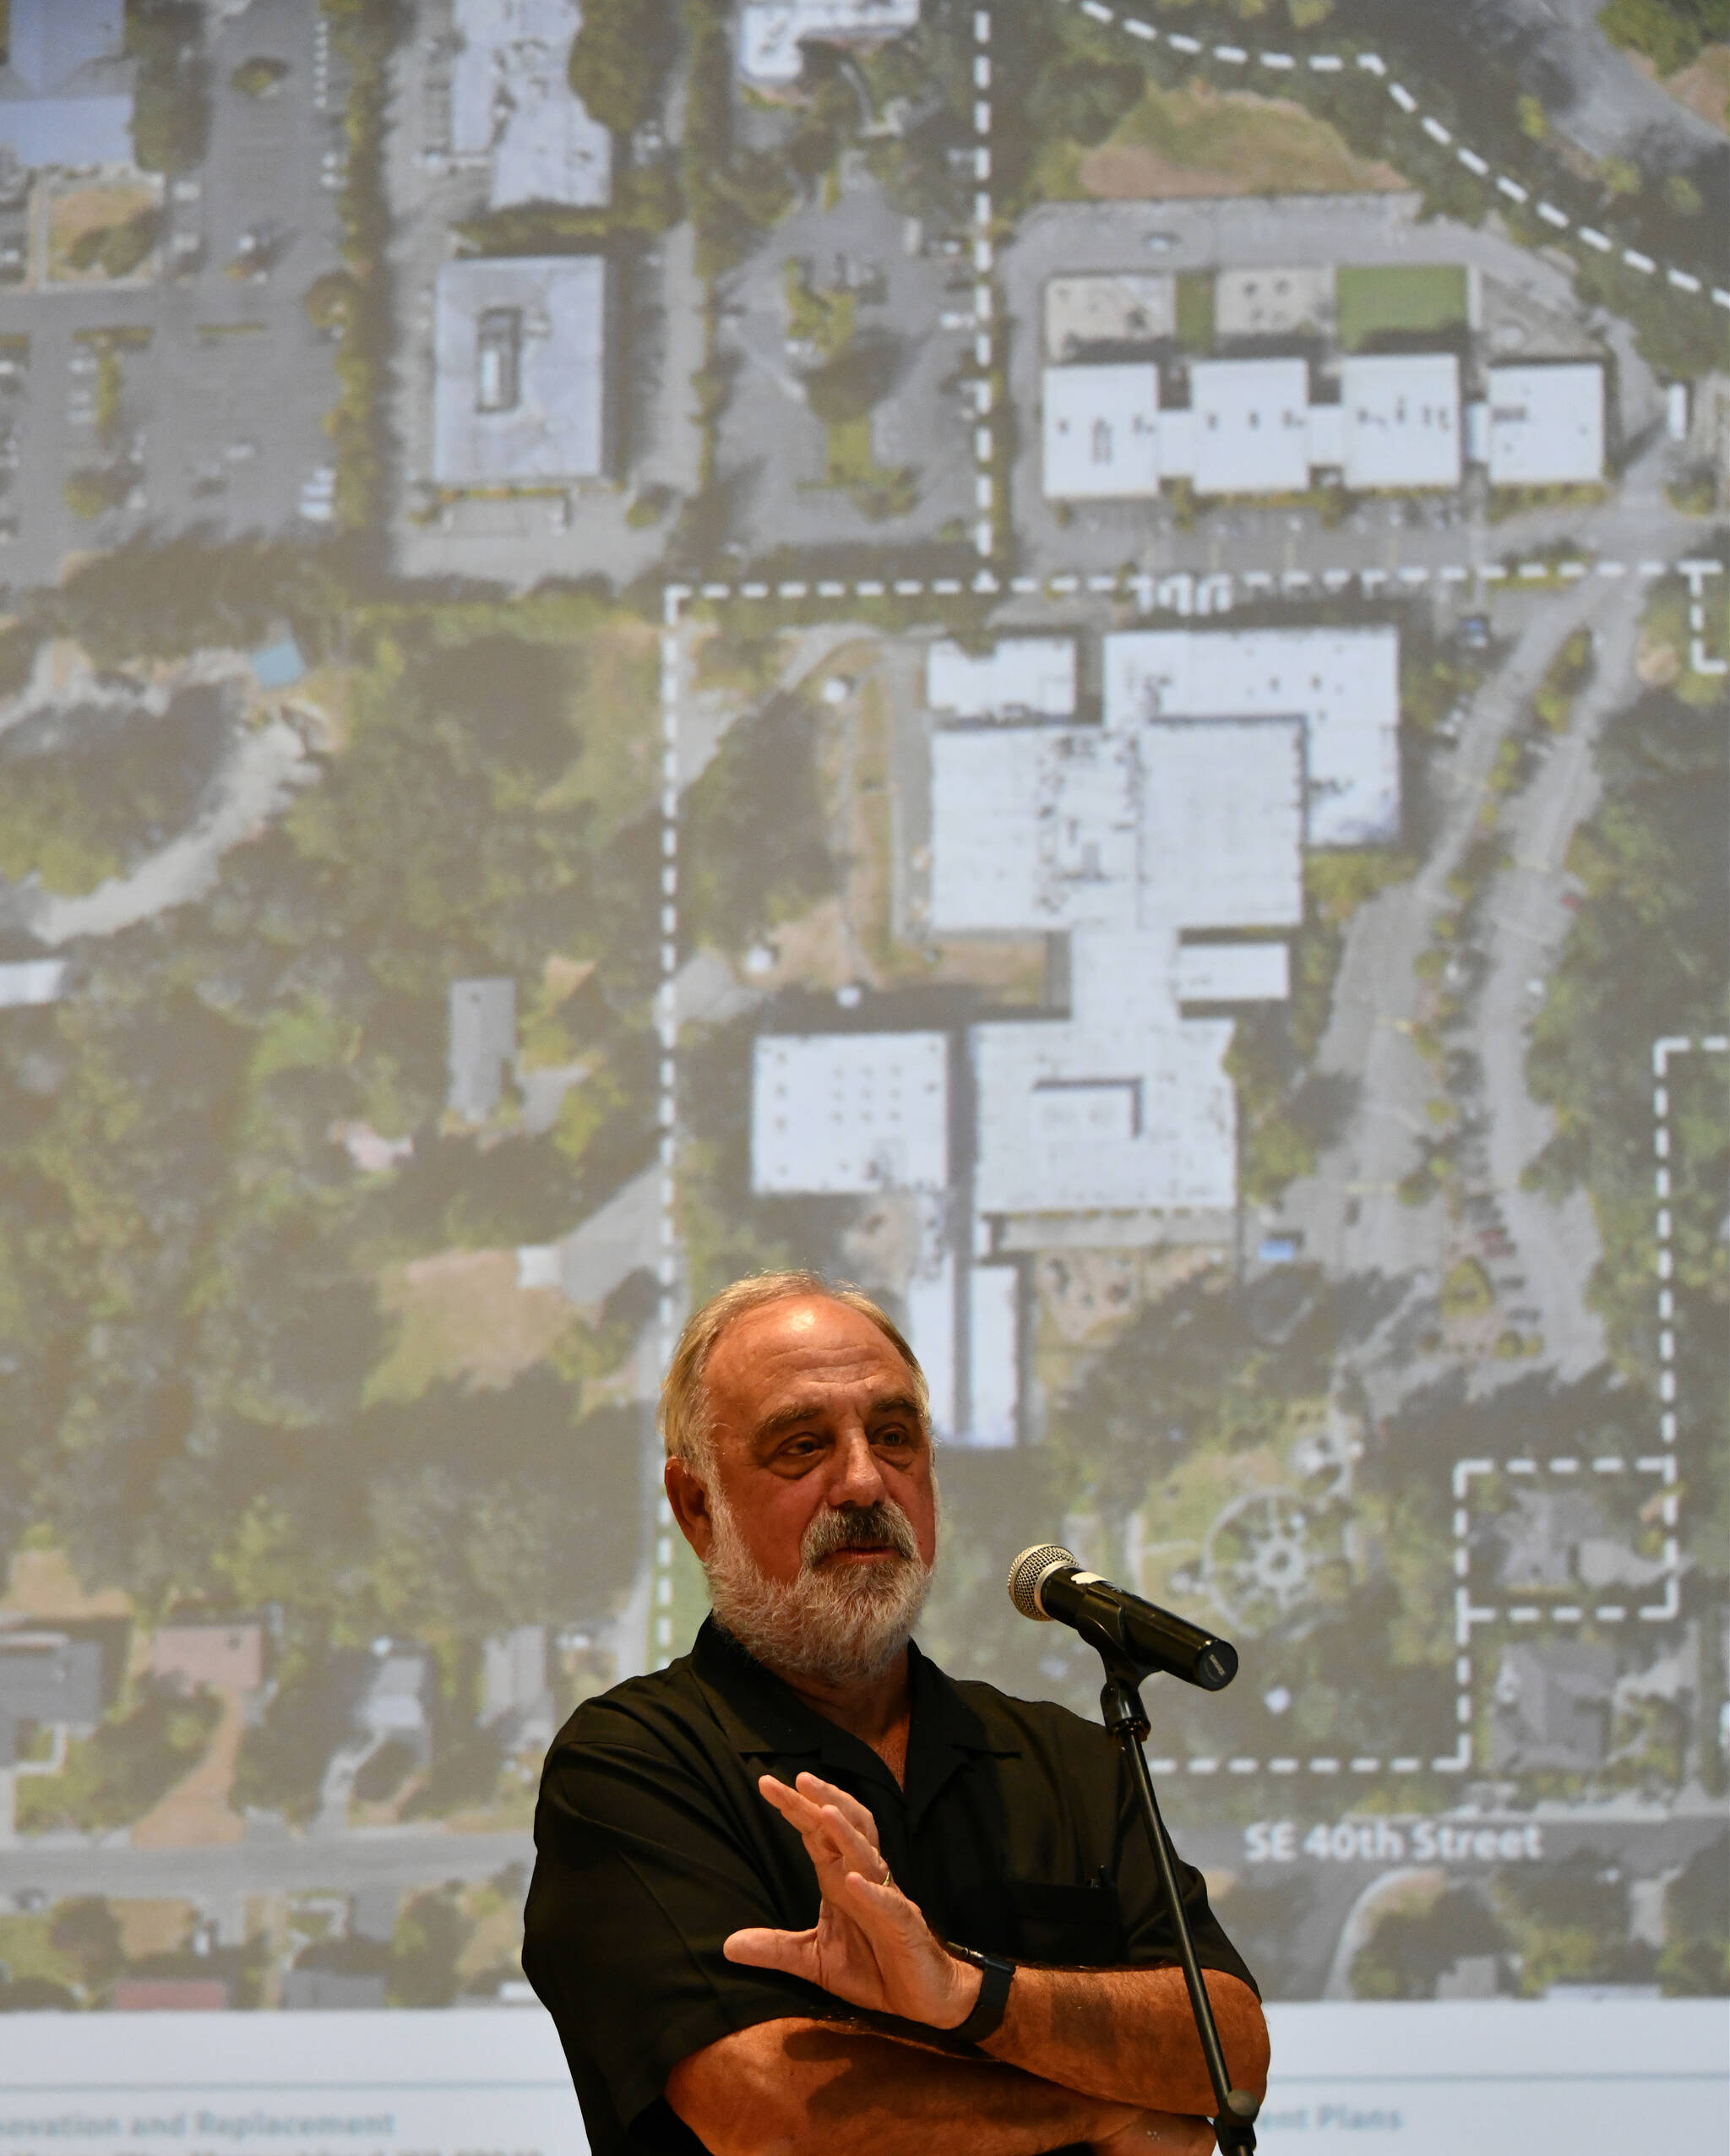 Architect Ed Weinstein rolls through the proposed renovation project presentation at the Stroum Jewish Community Center on Sept. 7. Andy Nystrom/ staff photo